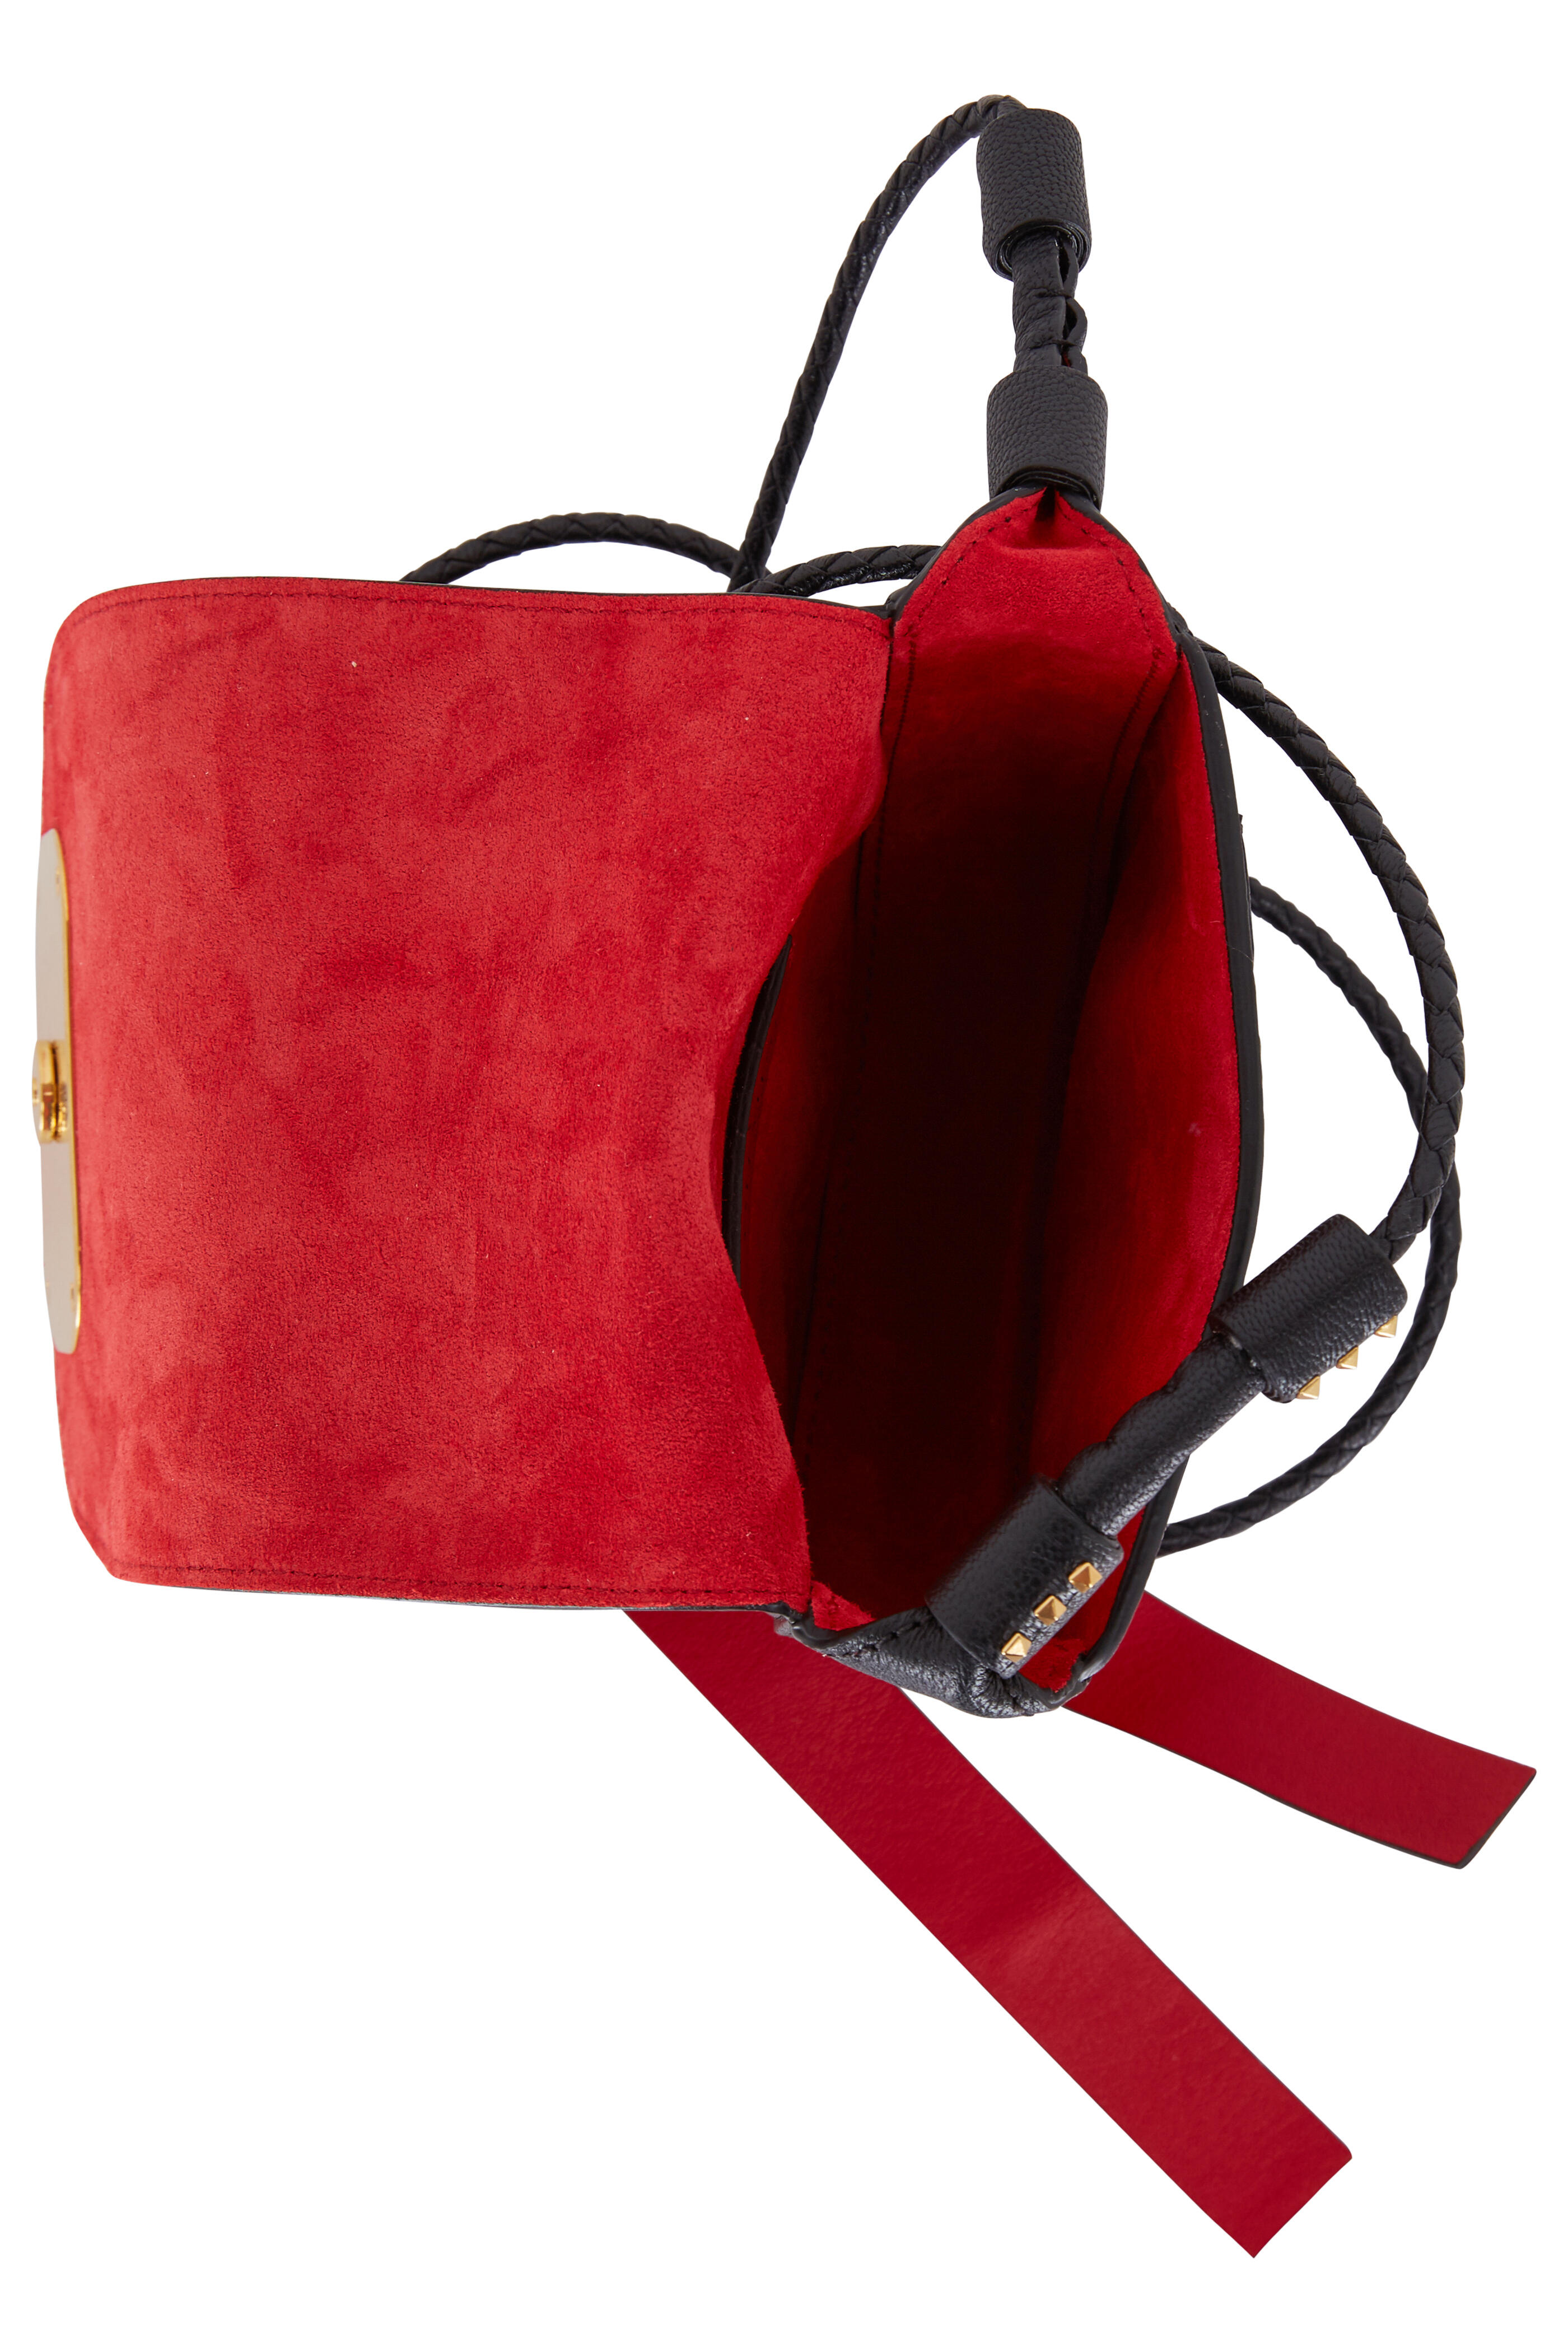 RED VALENTINO Suede Crossbody Bag Made in Italy